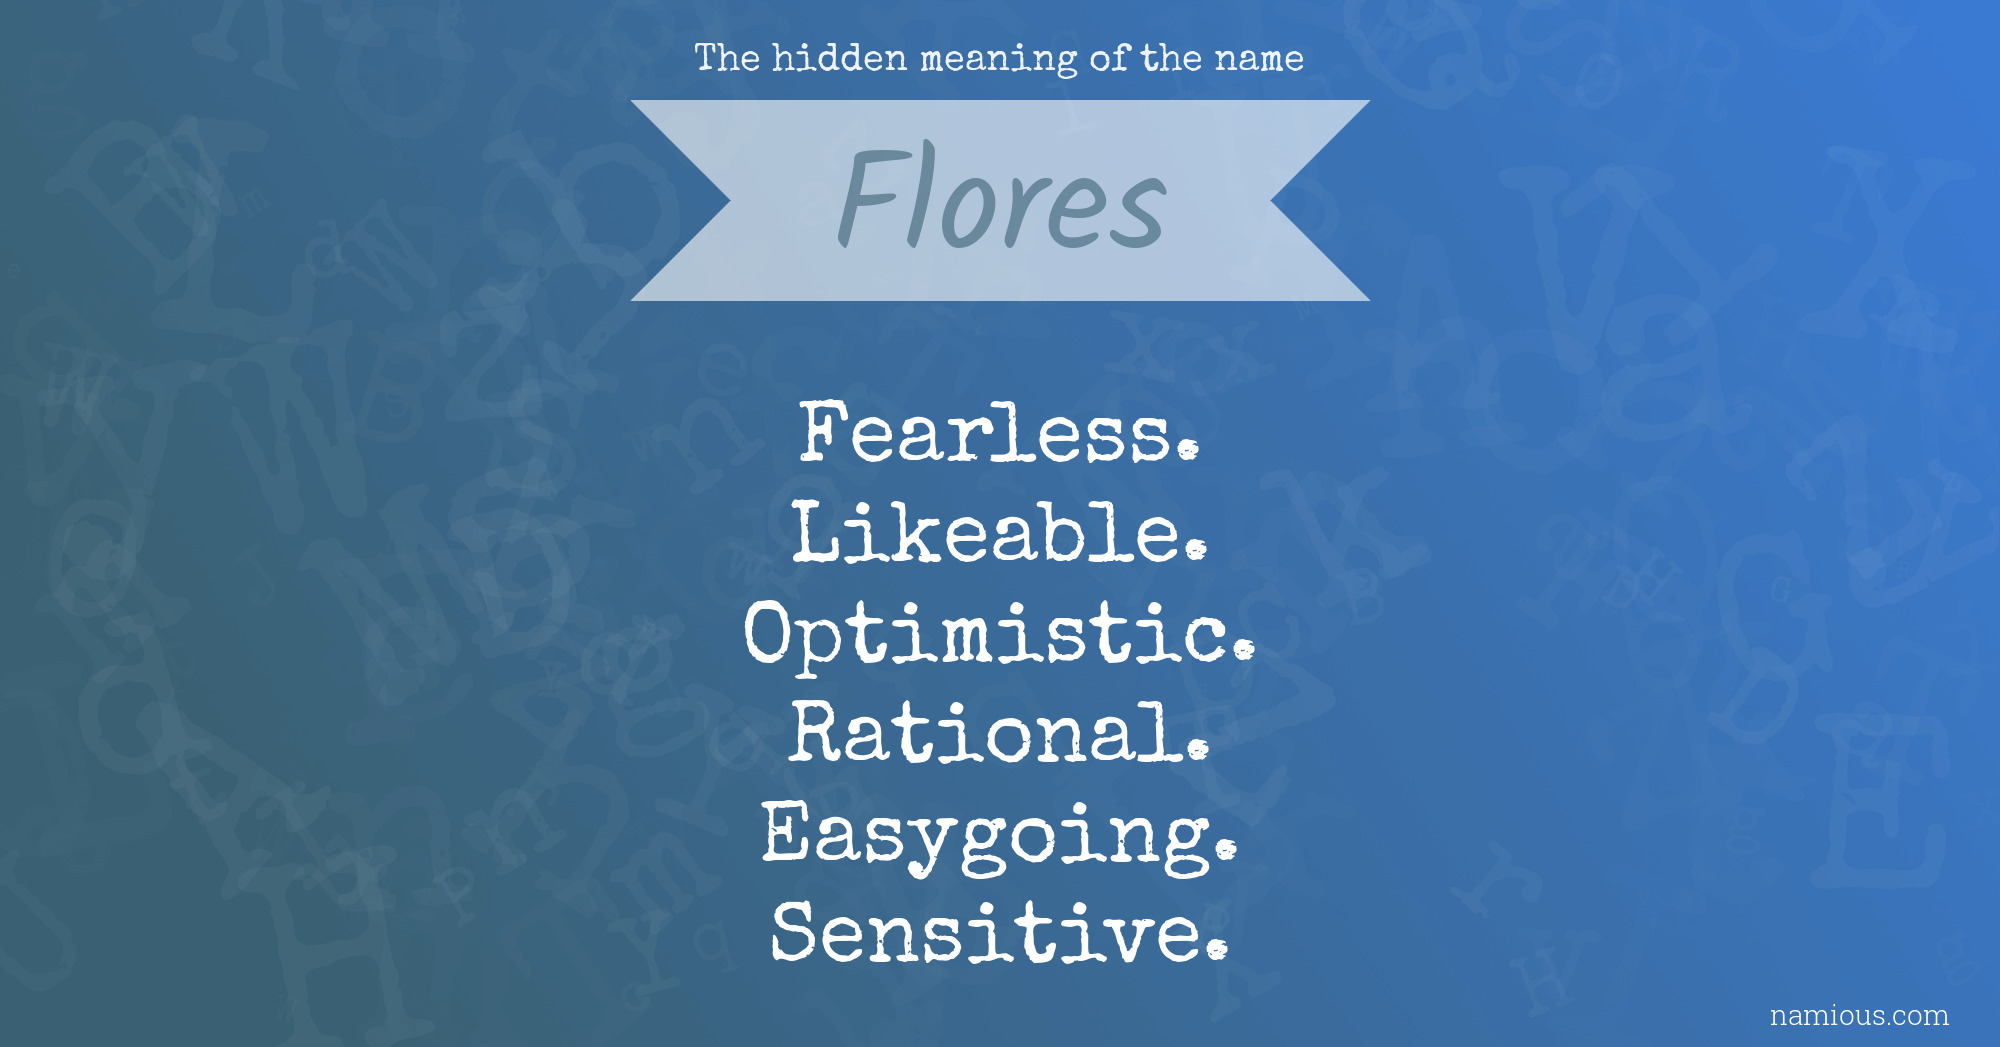 The hidden meaning of the name Flores